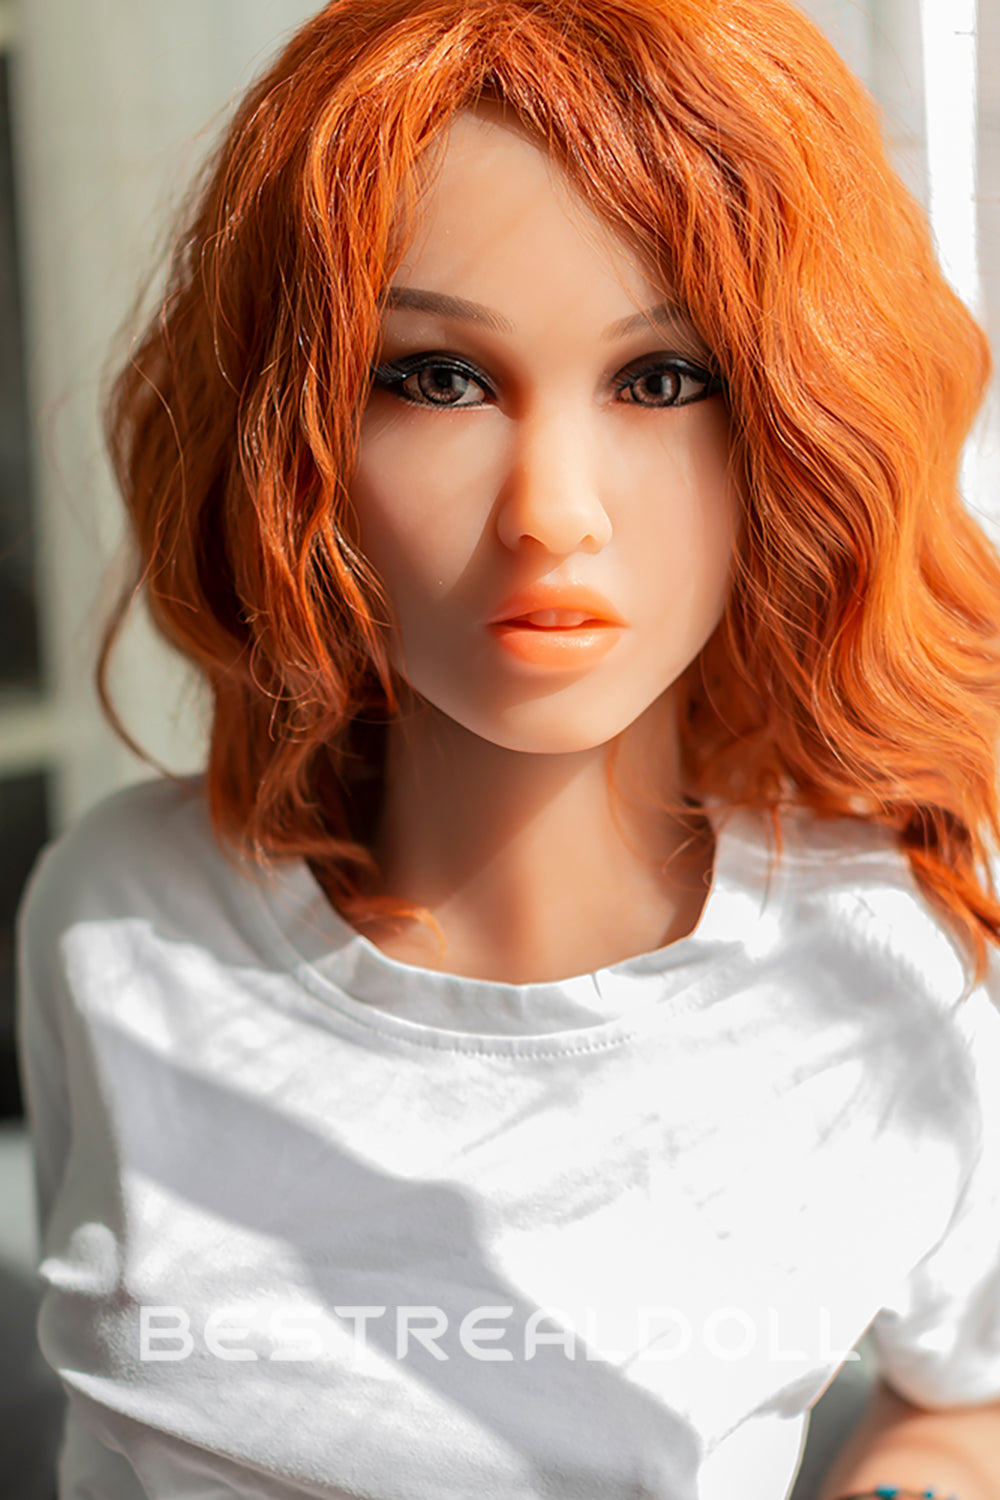 US Stock - 157cm Edeny TPE Sex Doll Realistic Small Breasts Orange Hair Love Doll